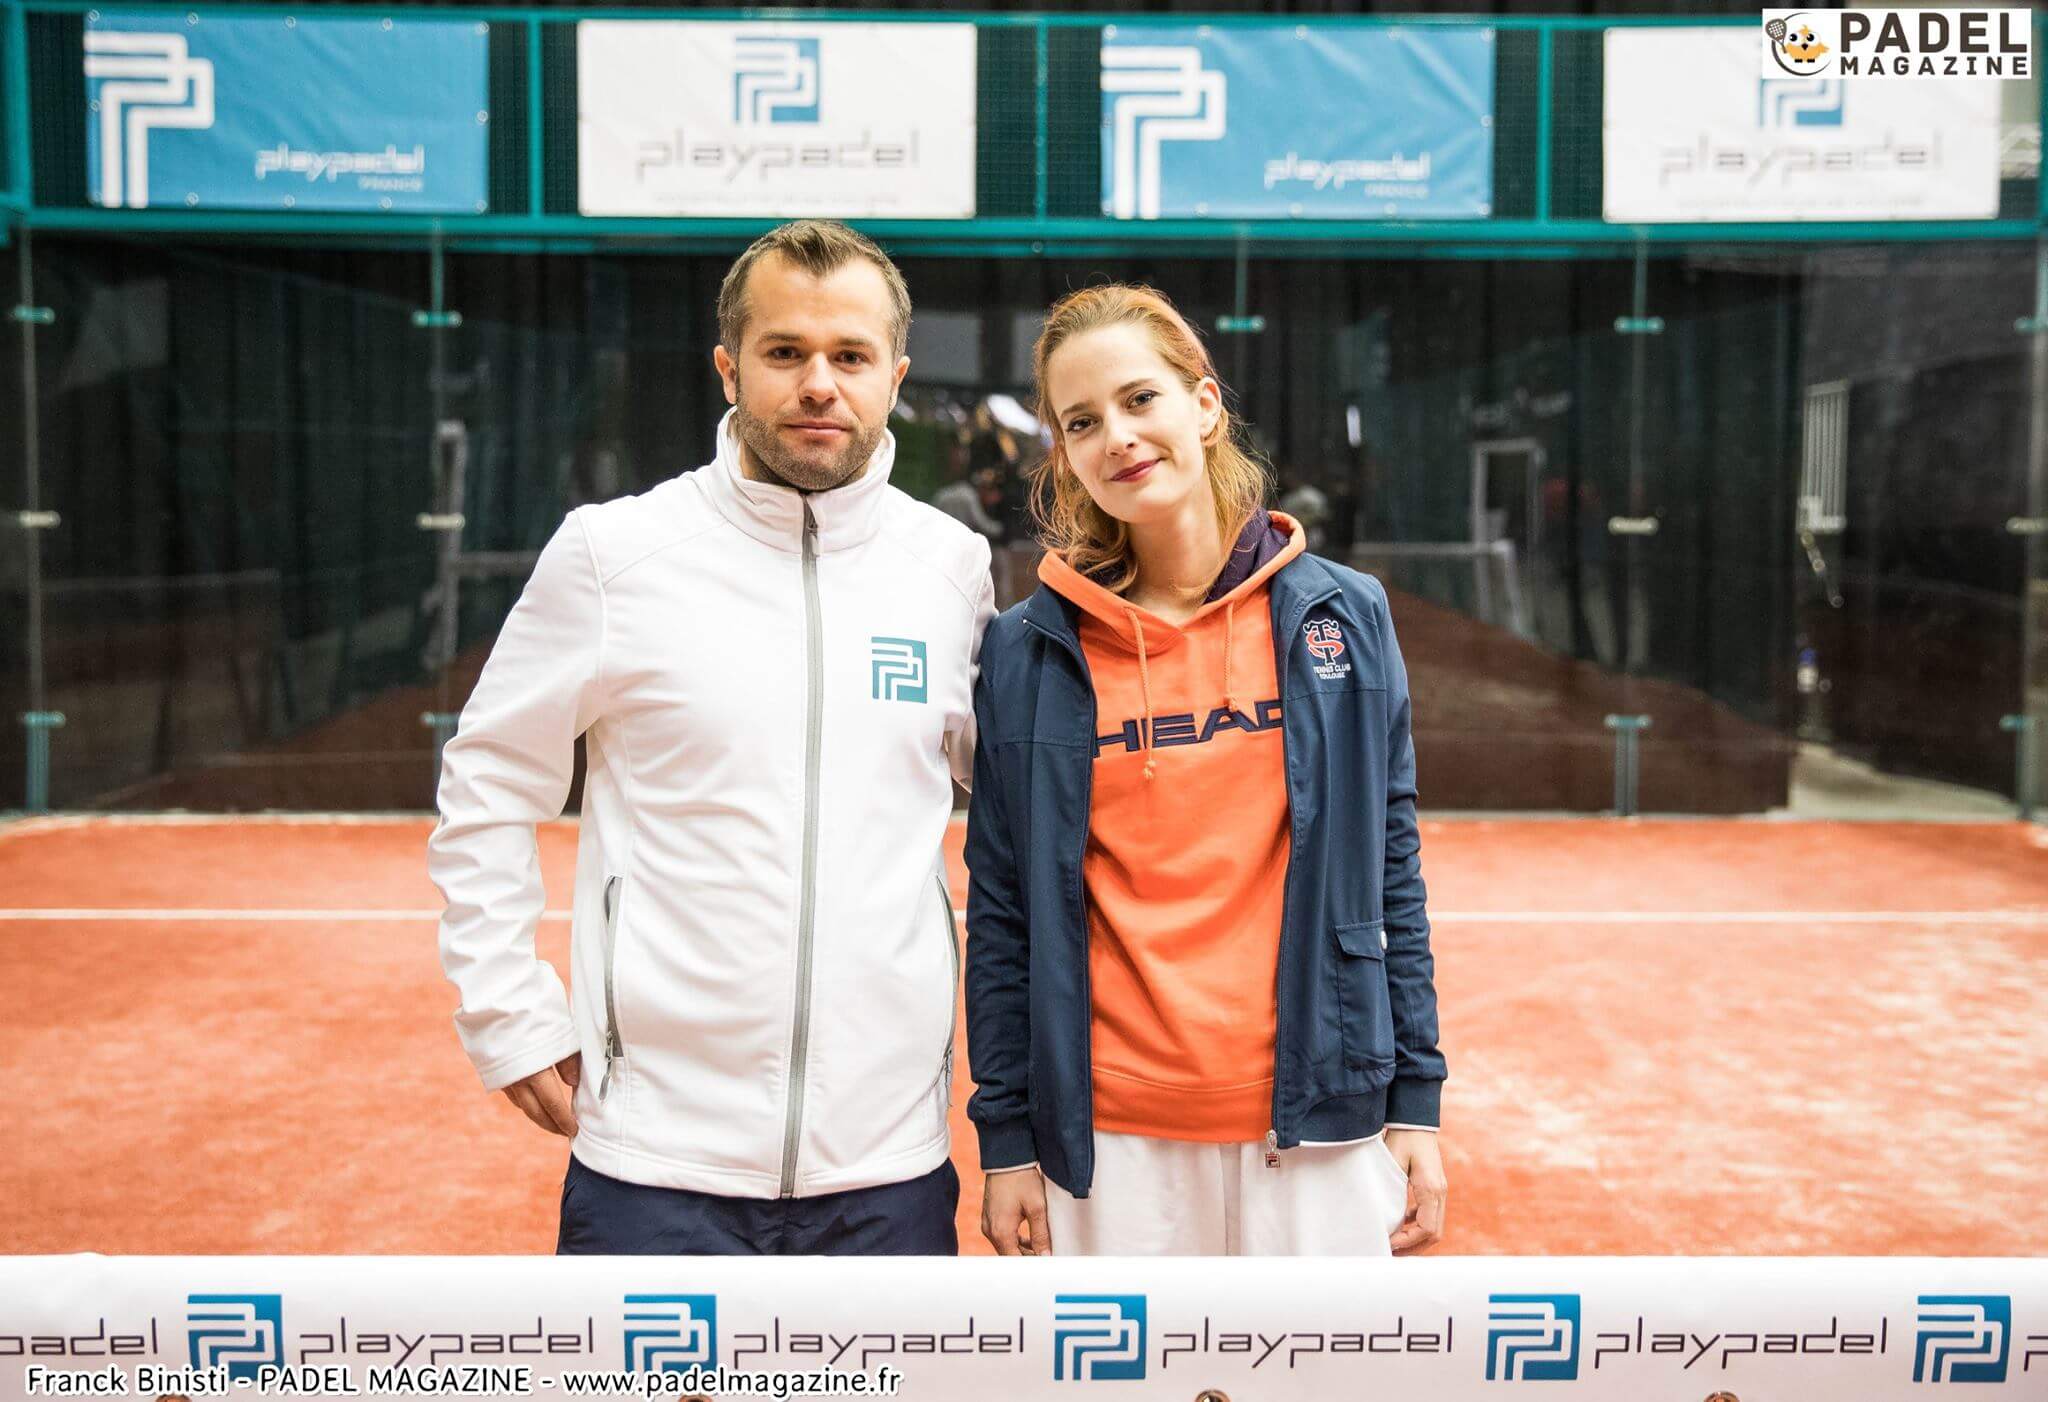 Olympic France invests the padel